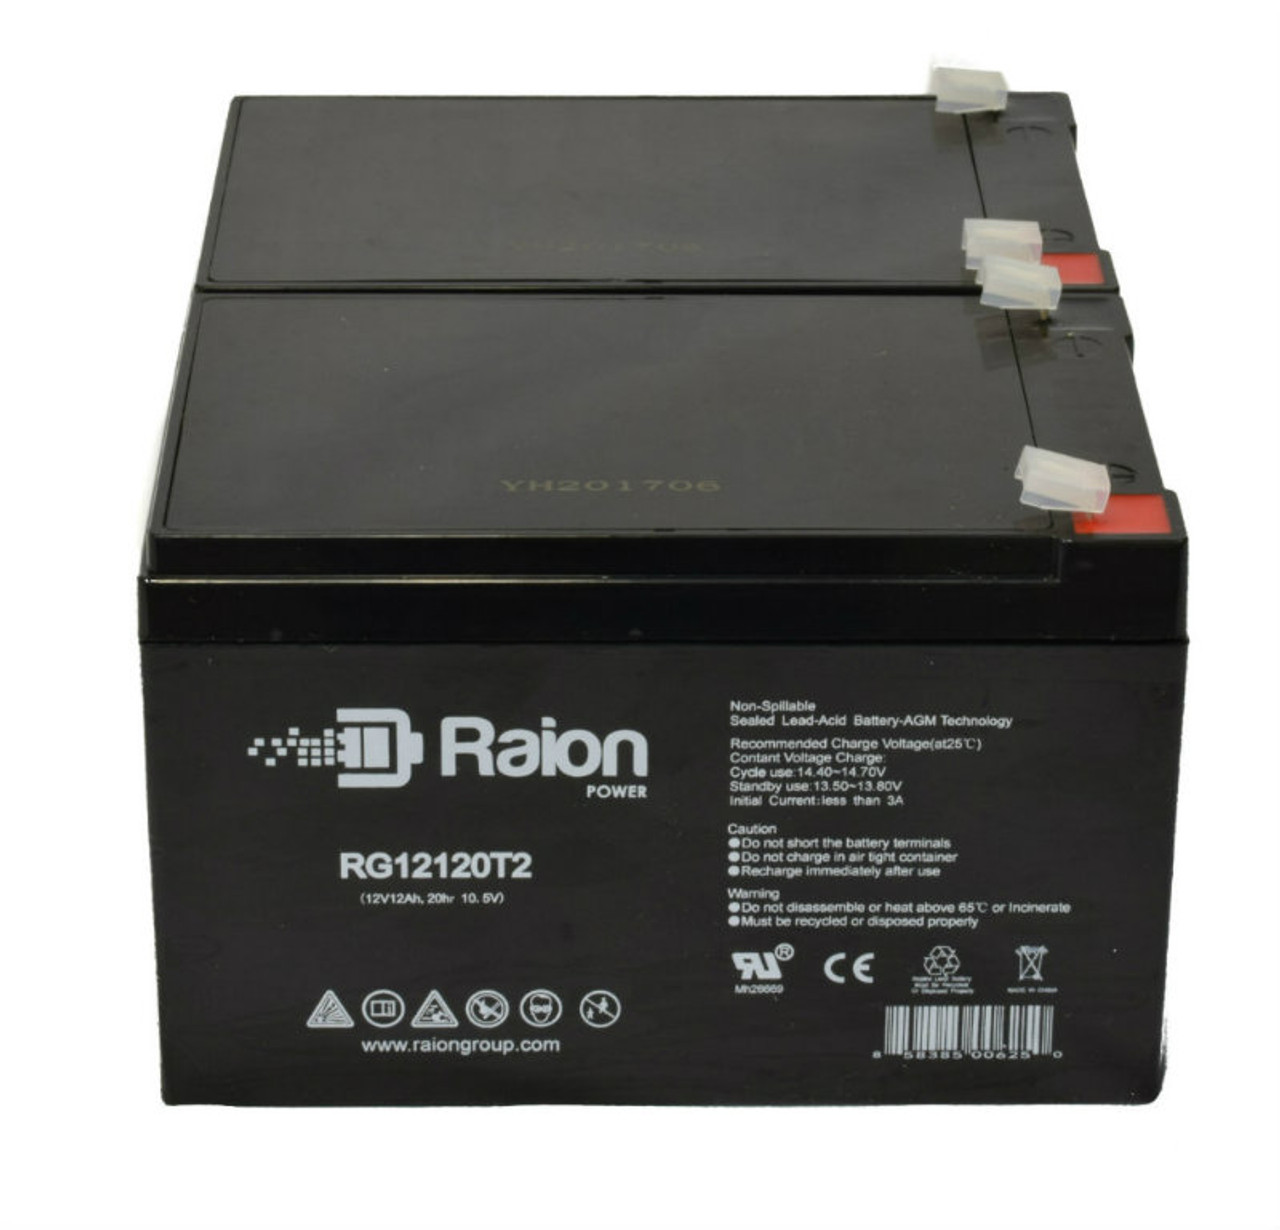 Raion Power 12V 12Ah Non-Spillable Compatible Replacement Battery for Ostar Power OP12120D - (2 Pack)